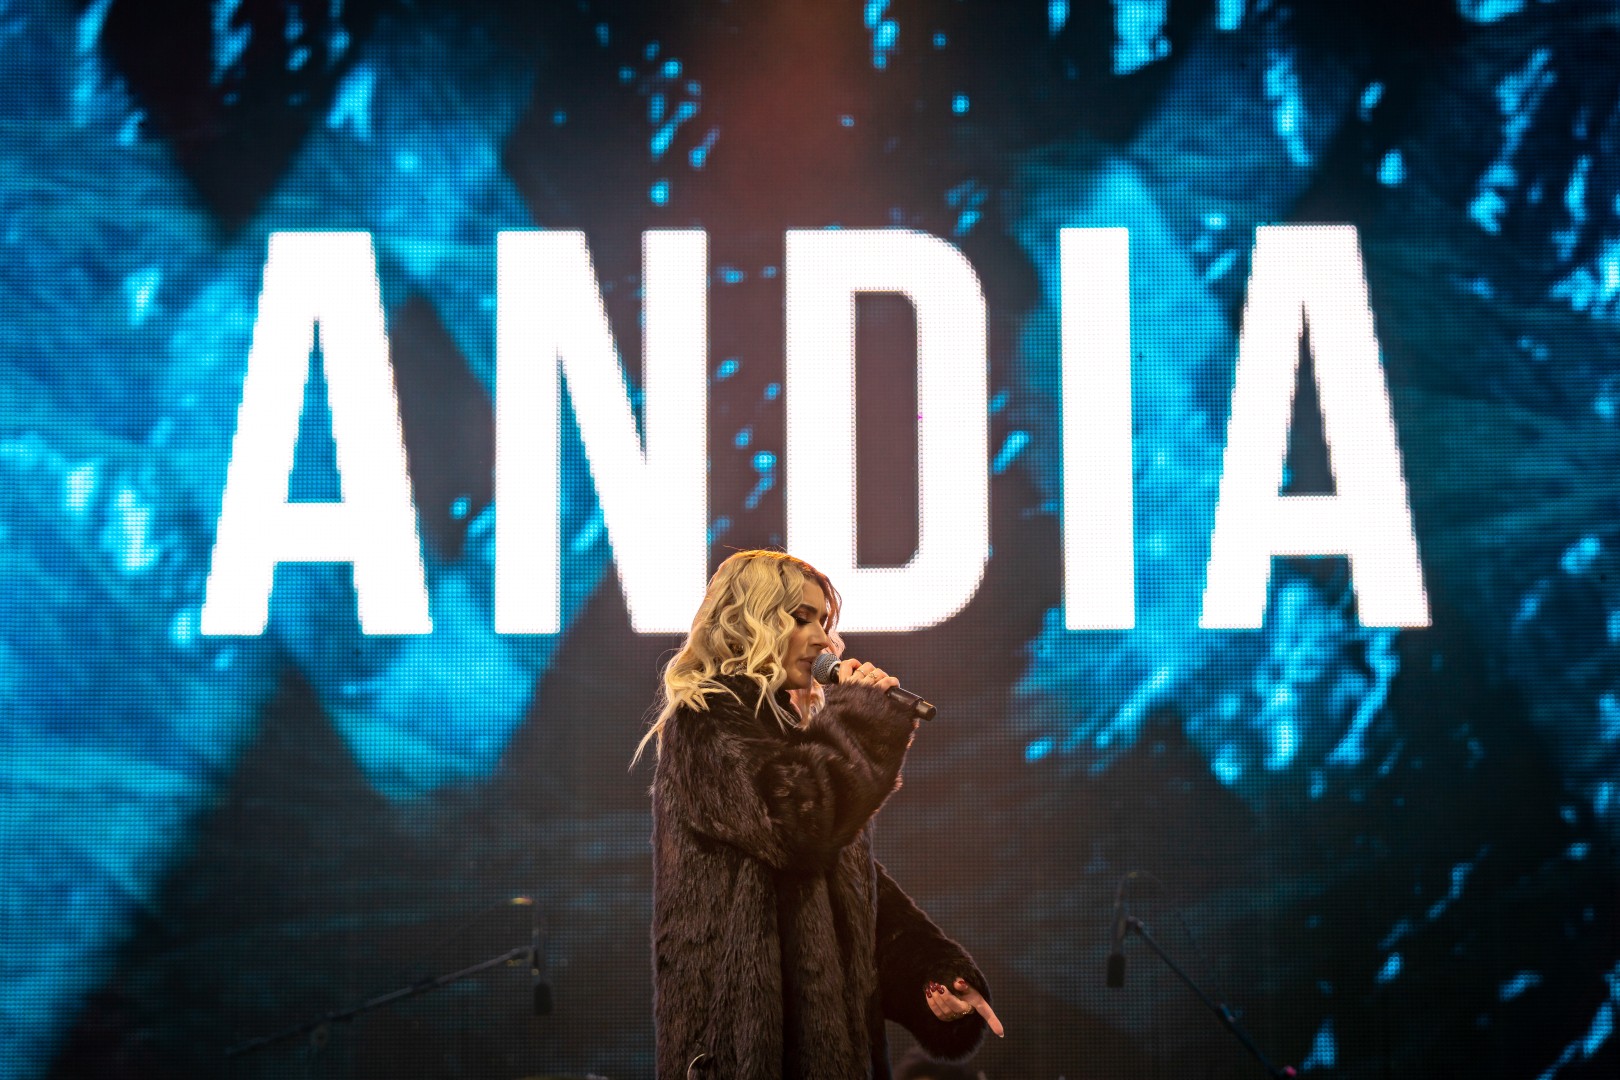 Andia at National Arena in Bucharest on March 12, 2022 (2aed2218cc)